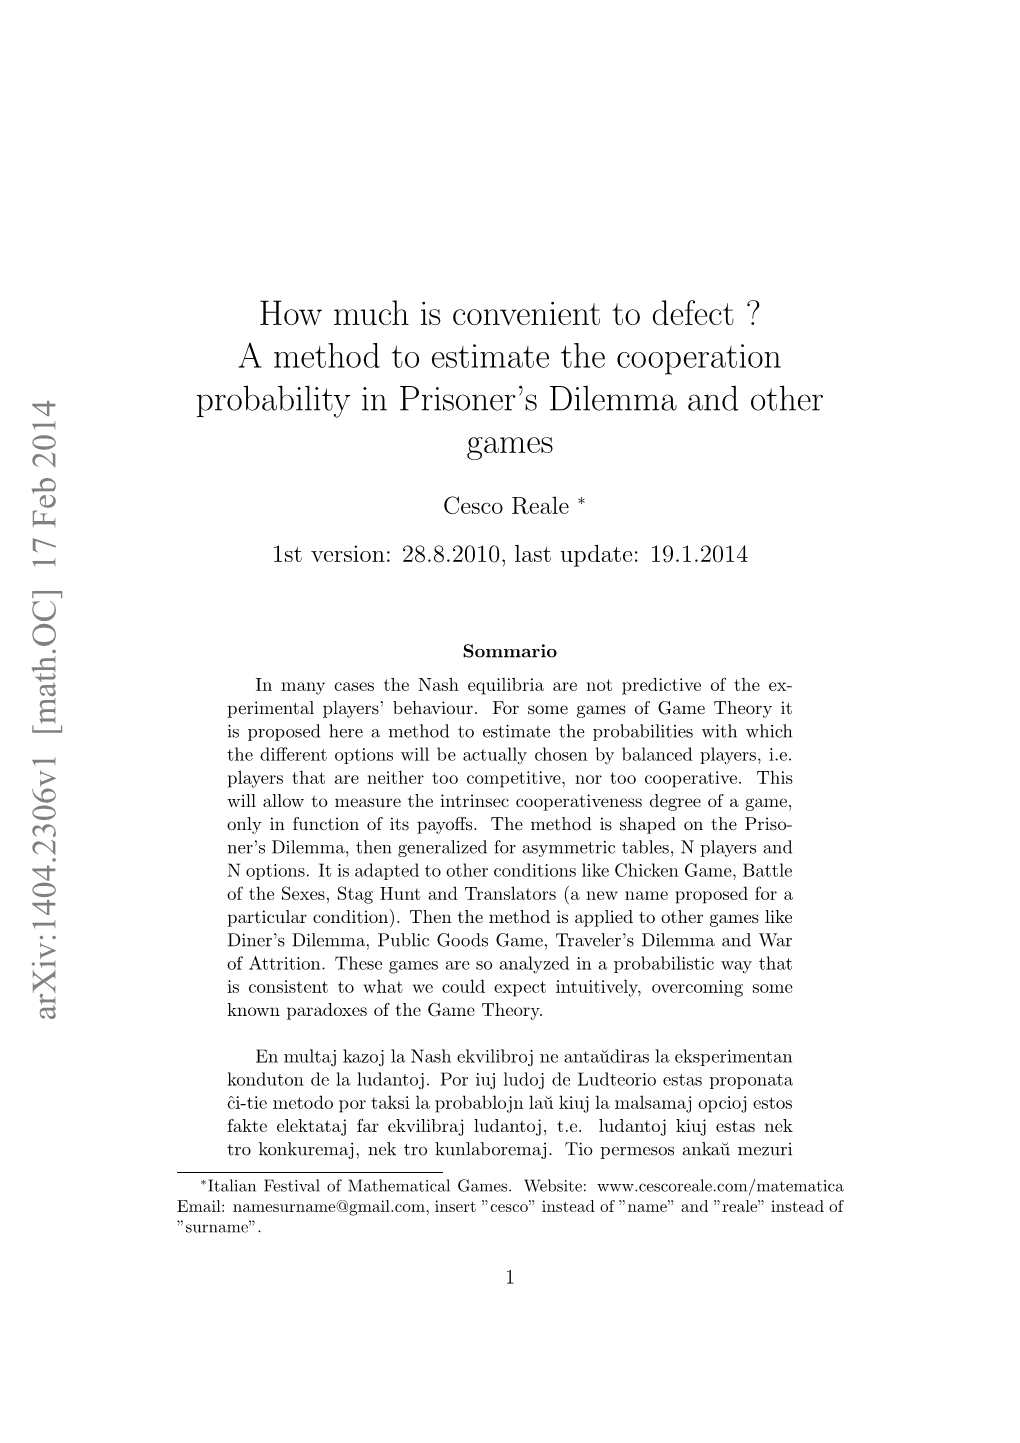 How Much Is Convenient to Defect? a Method to Estimate the Cooperation